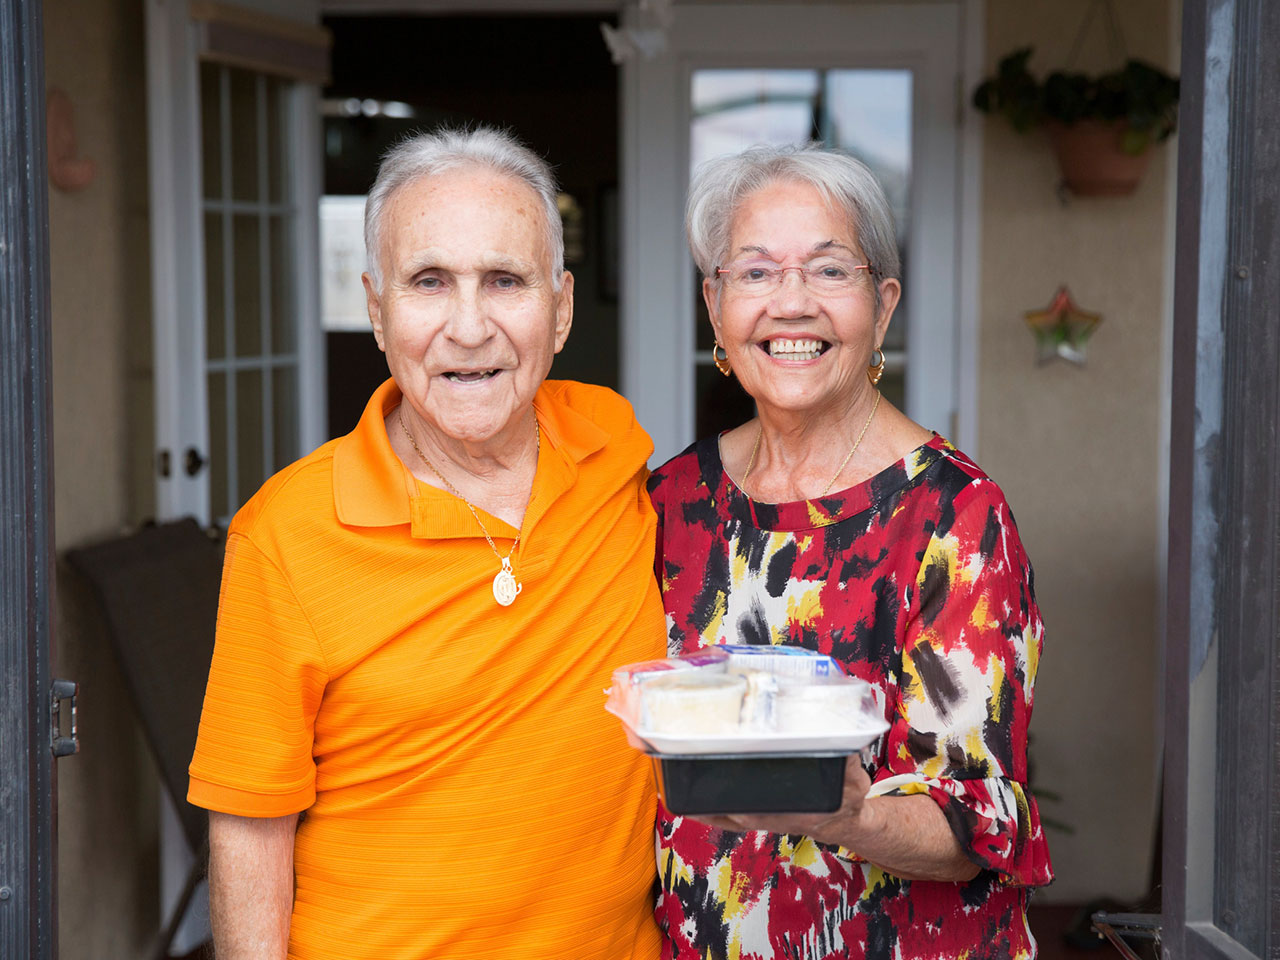 A senior couple, clients of Meals on Wheels America, after receiving their meal.